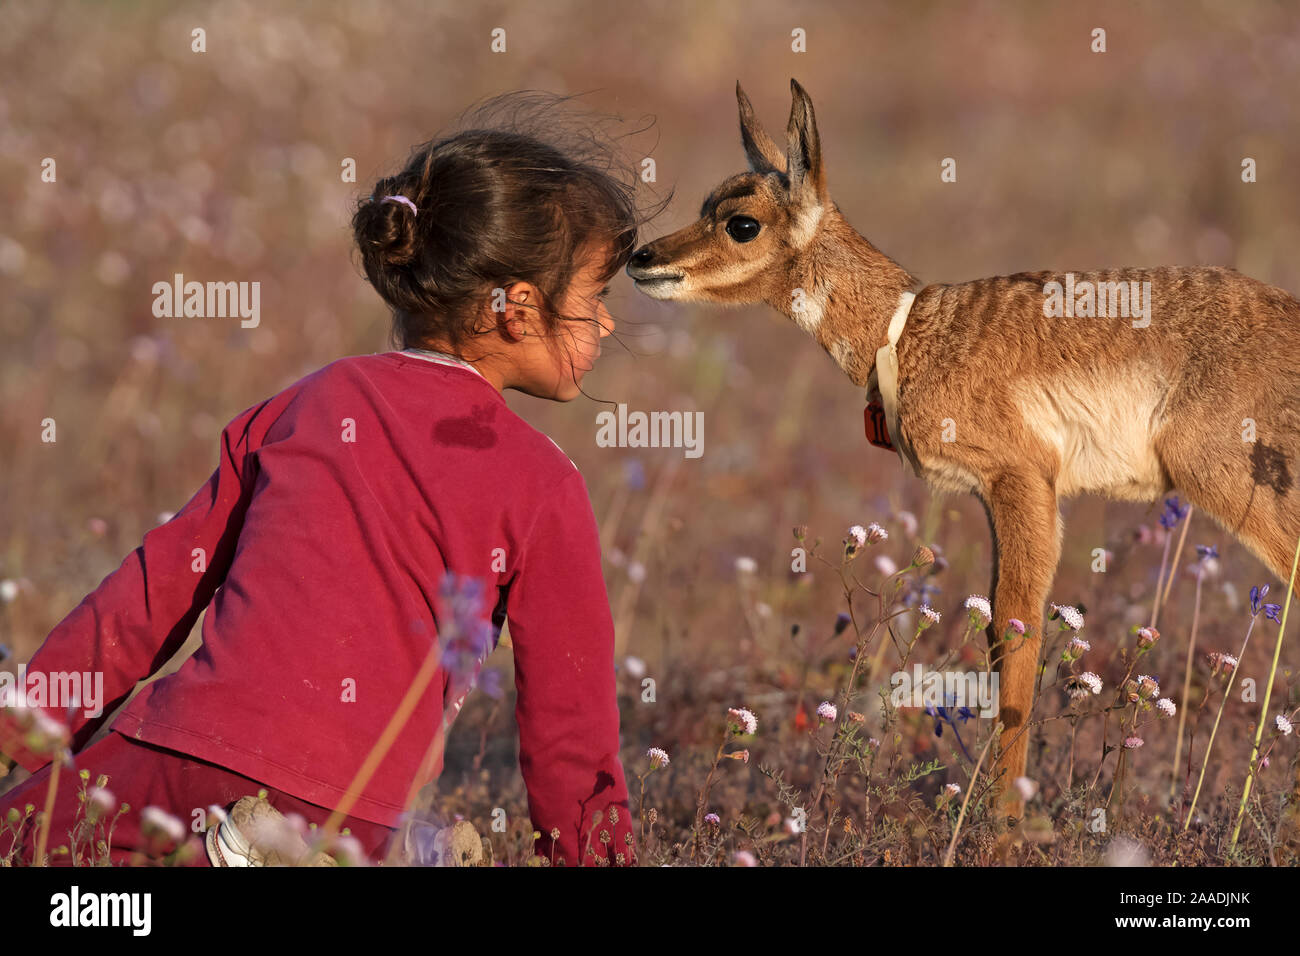 Young girl face to face with Peninsular Pronghorn Antelope (Antilocapra americana peninsularis) fawn at Peninsular Pronghorn recovery project, El Vizcaino Desert Biosphere Reserve, Baja California Peninsula, Mexico, March, First prize in the 'Passion for Conservation' National Contest organised by Mexico's National Comission of Natural Protected Areas (CONANP) Model released Stock Photo